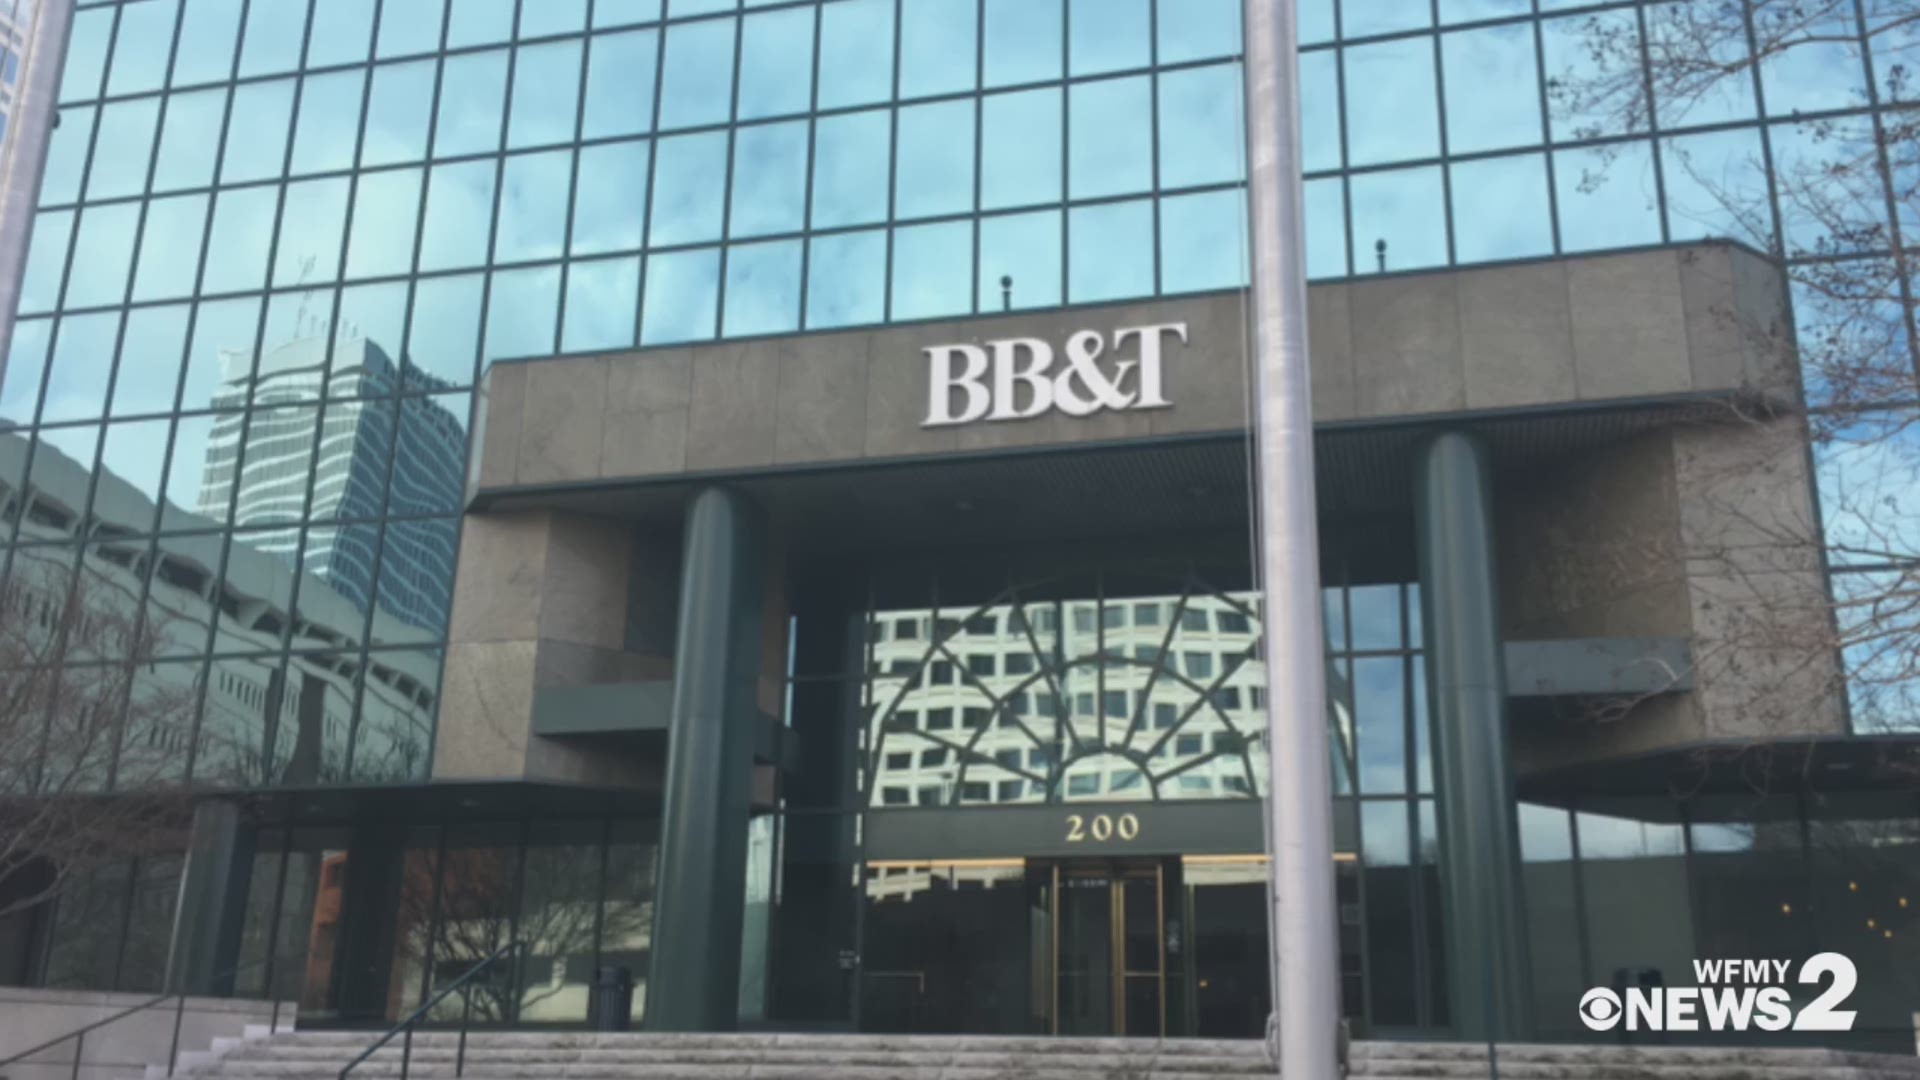 Winston-Salem based BB&T and SunTrust announced a merger Thursday. The combined company will be based in Charlotte. What does it mean for Winston-Salem?